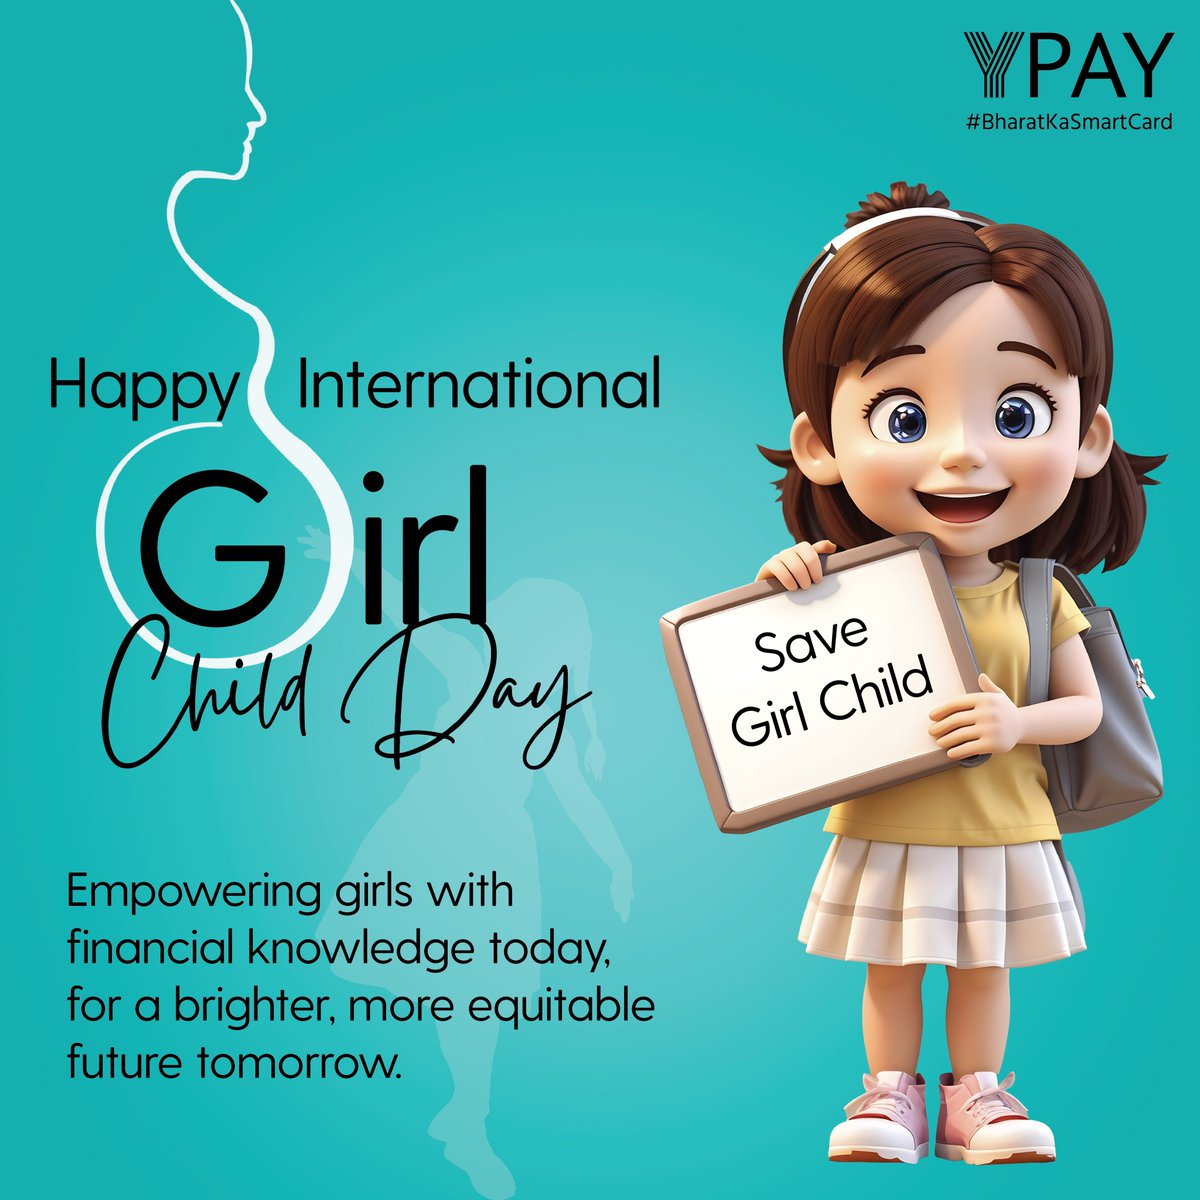 Empowering Future Financial Leaders! Celebrating Girl Child Day with a promise to nurture dreams and foster financial independence. 💸👧💪

#YPay #BharatKaSmartCard #Fintech #FinancialLiteracy #GirlChildDay #EmpowerHerFuture #FinancialFreedom